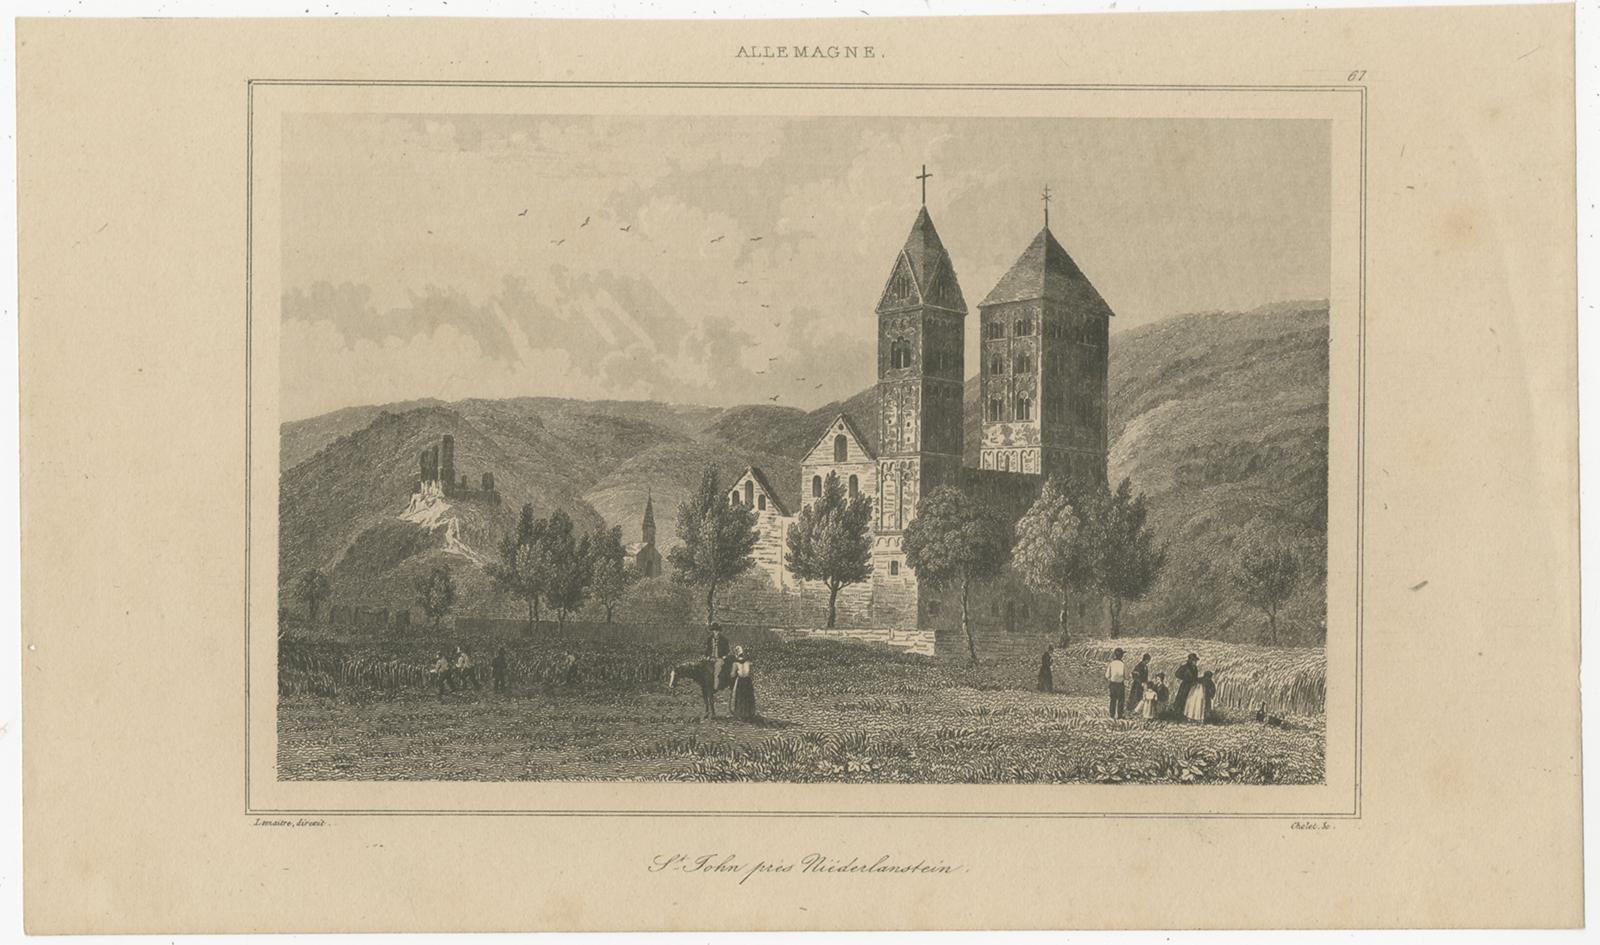 Antique print titled 'St. John près Niederlandstein'. View of St John's Church near Niederlahnstein, Germany. Originates from 'L'Univers Pittoresque' published by Firmin Didot Freres, Paris, 1838.